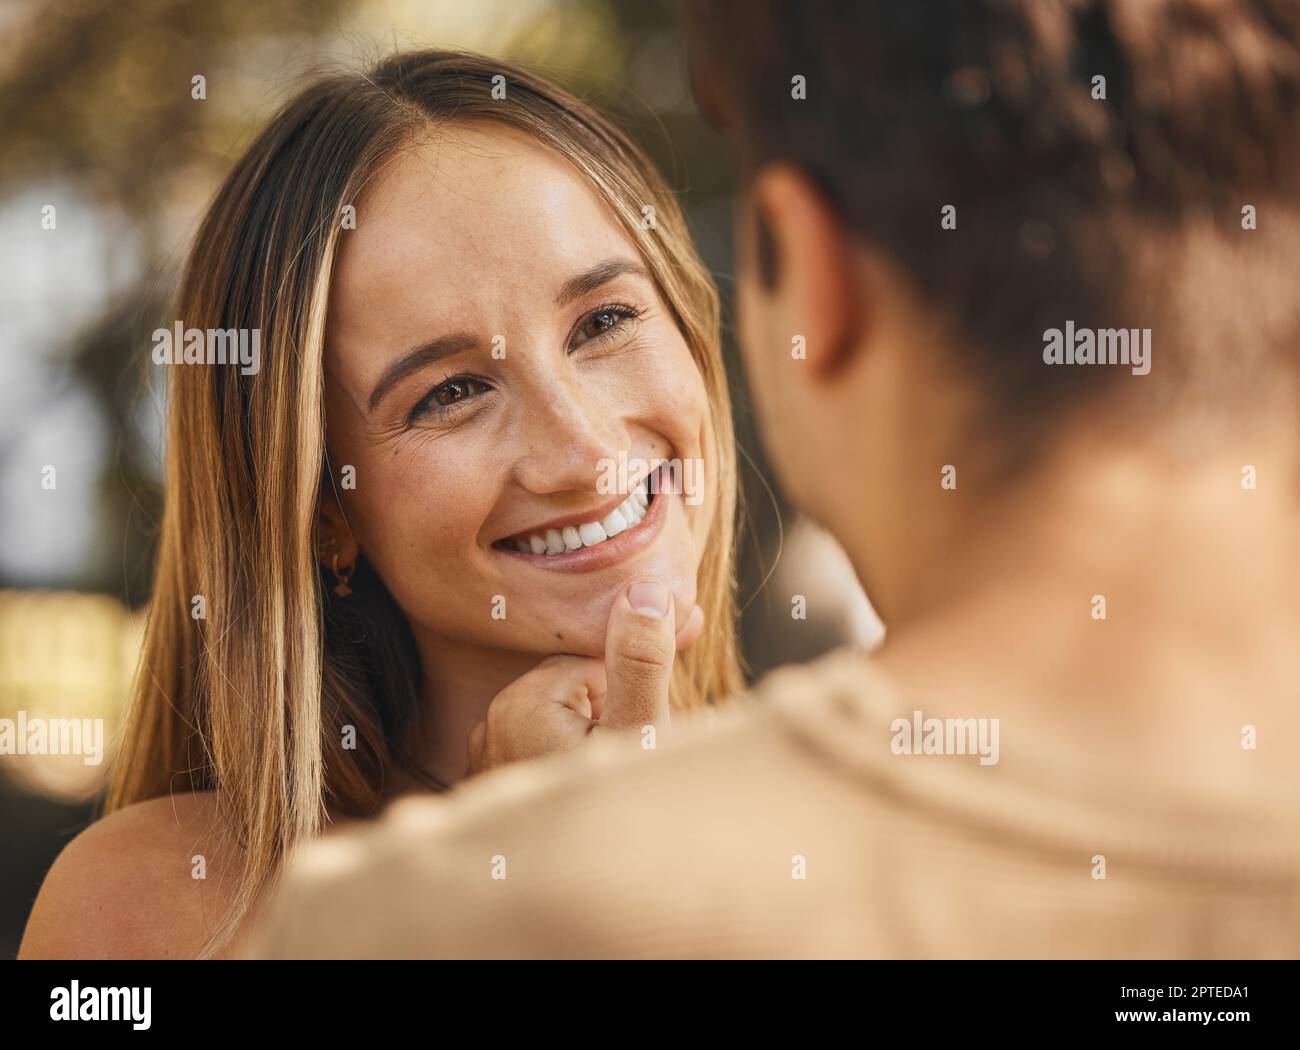 https://c8.alamy.com/comp/2PTEDA1/happy-girlfriend-and-face-touch-of-a-woman-with-a-smile-love-and-care-looking-at-her-boyfriend-happiness-bonding-and-relax-feeling-together-of-a-c-2PTEDA1.jpg